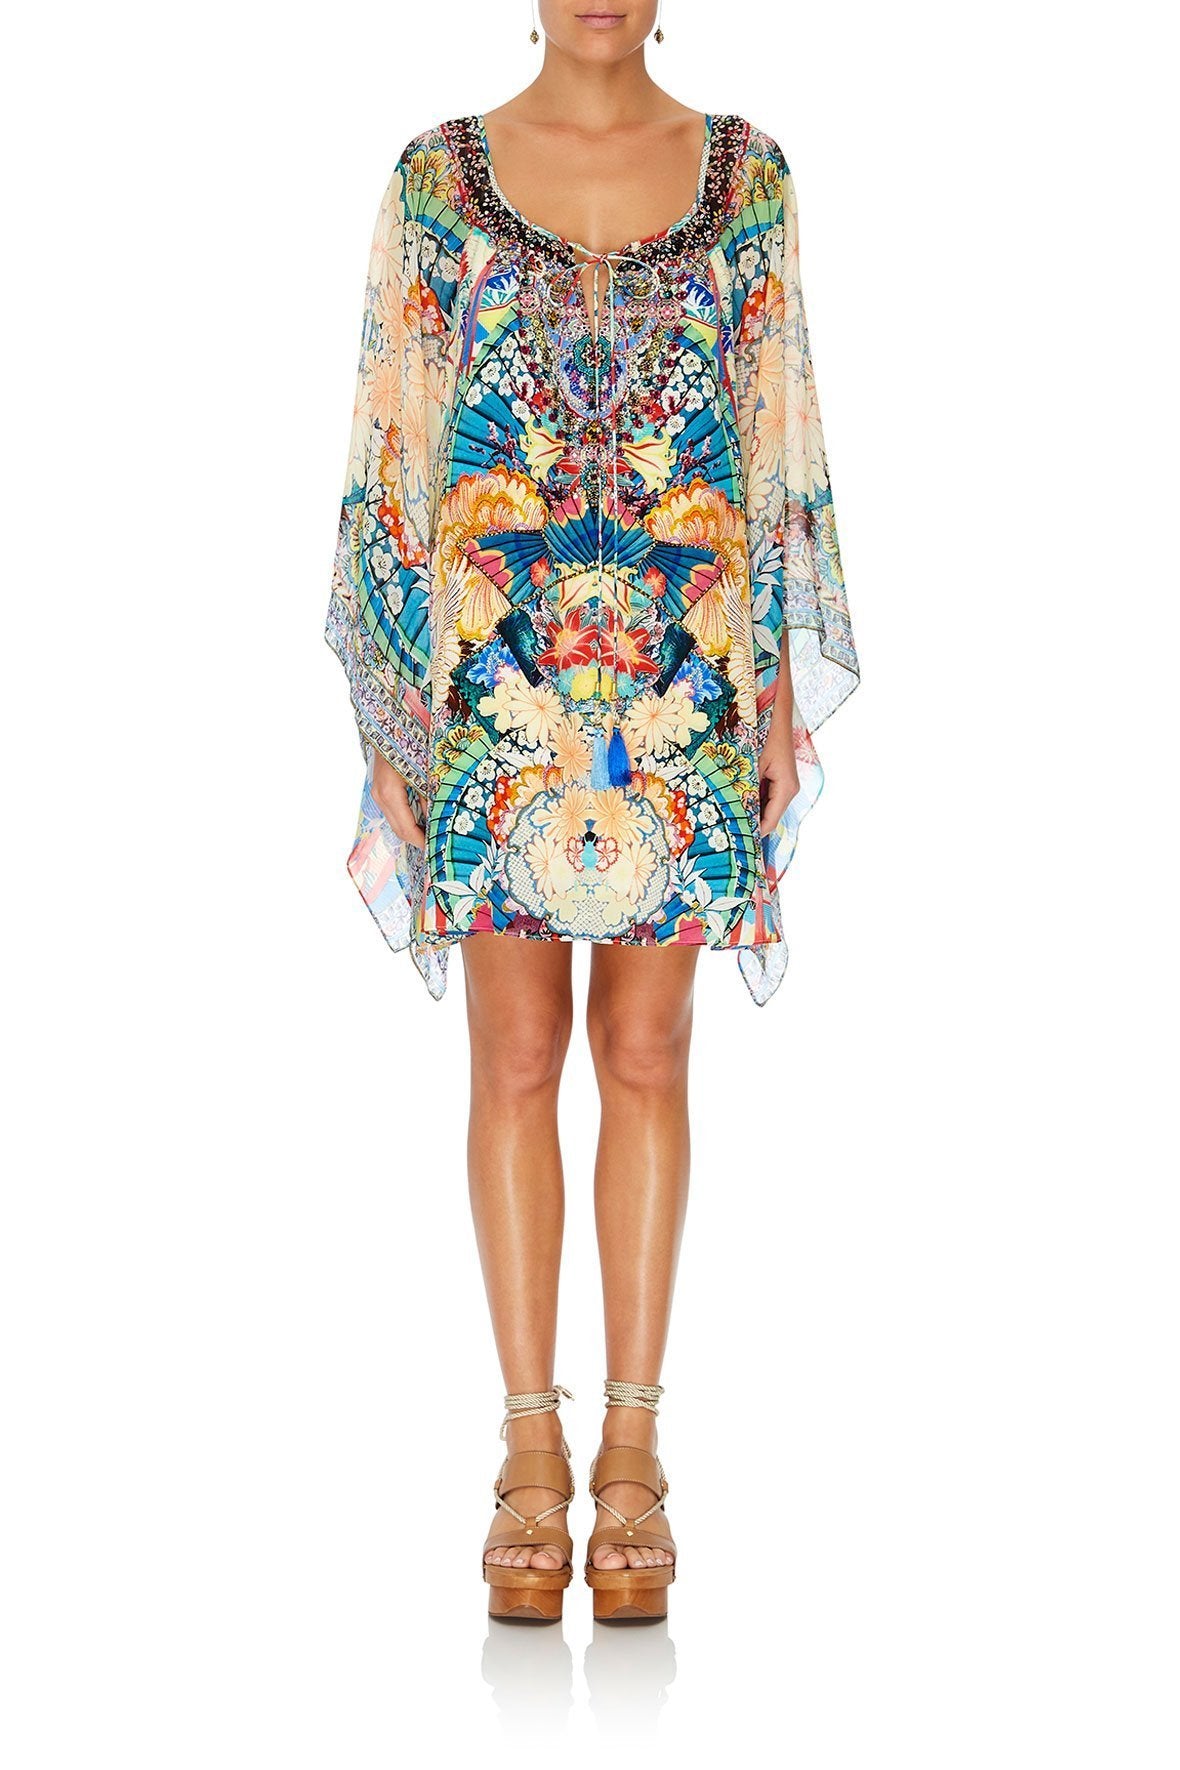 KAFTAN WITH TIE FRONT DETAIL MISO IN LOVE – CAMILLA